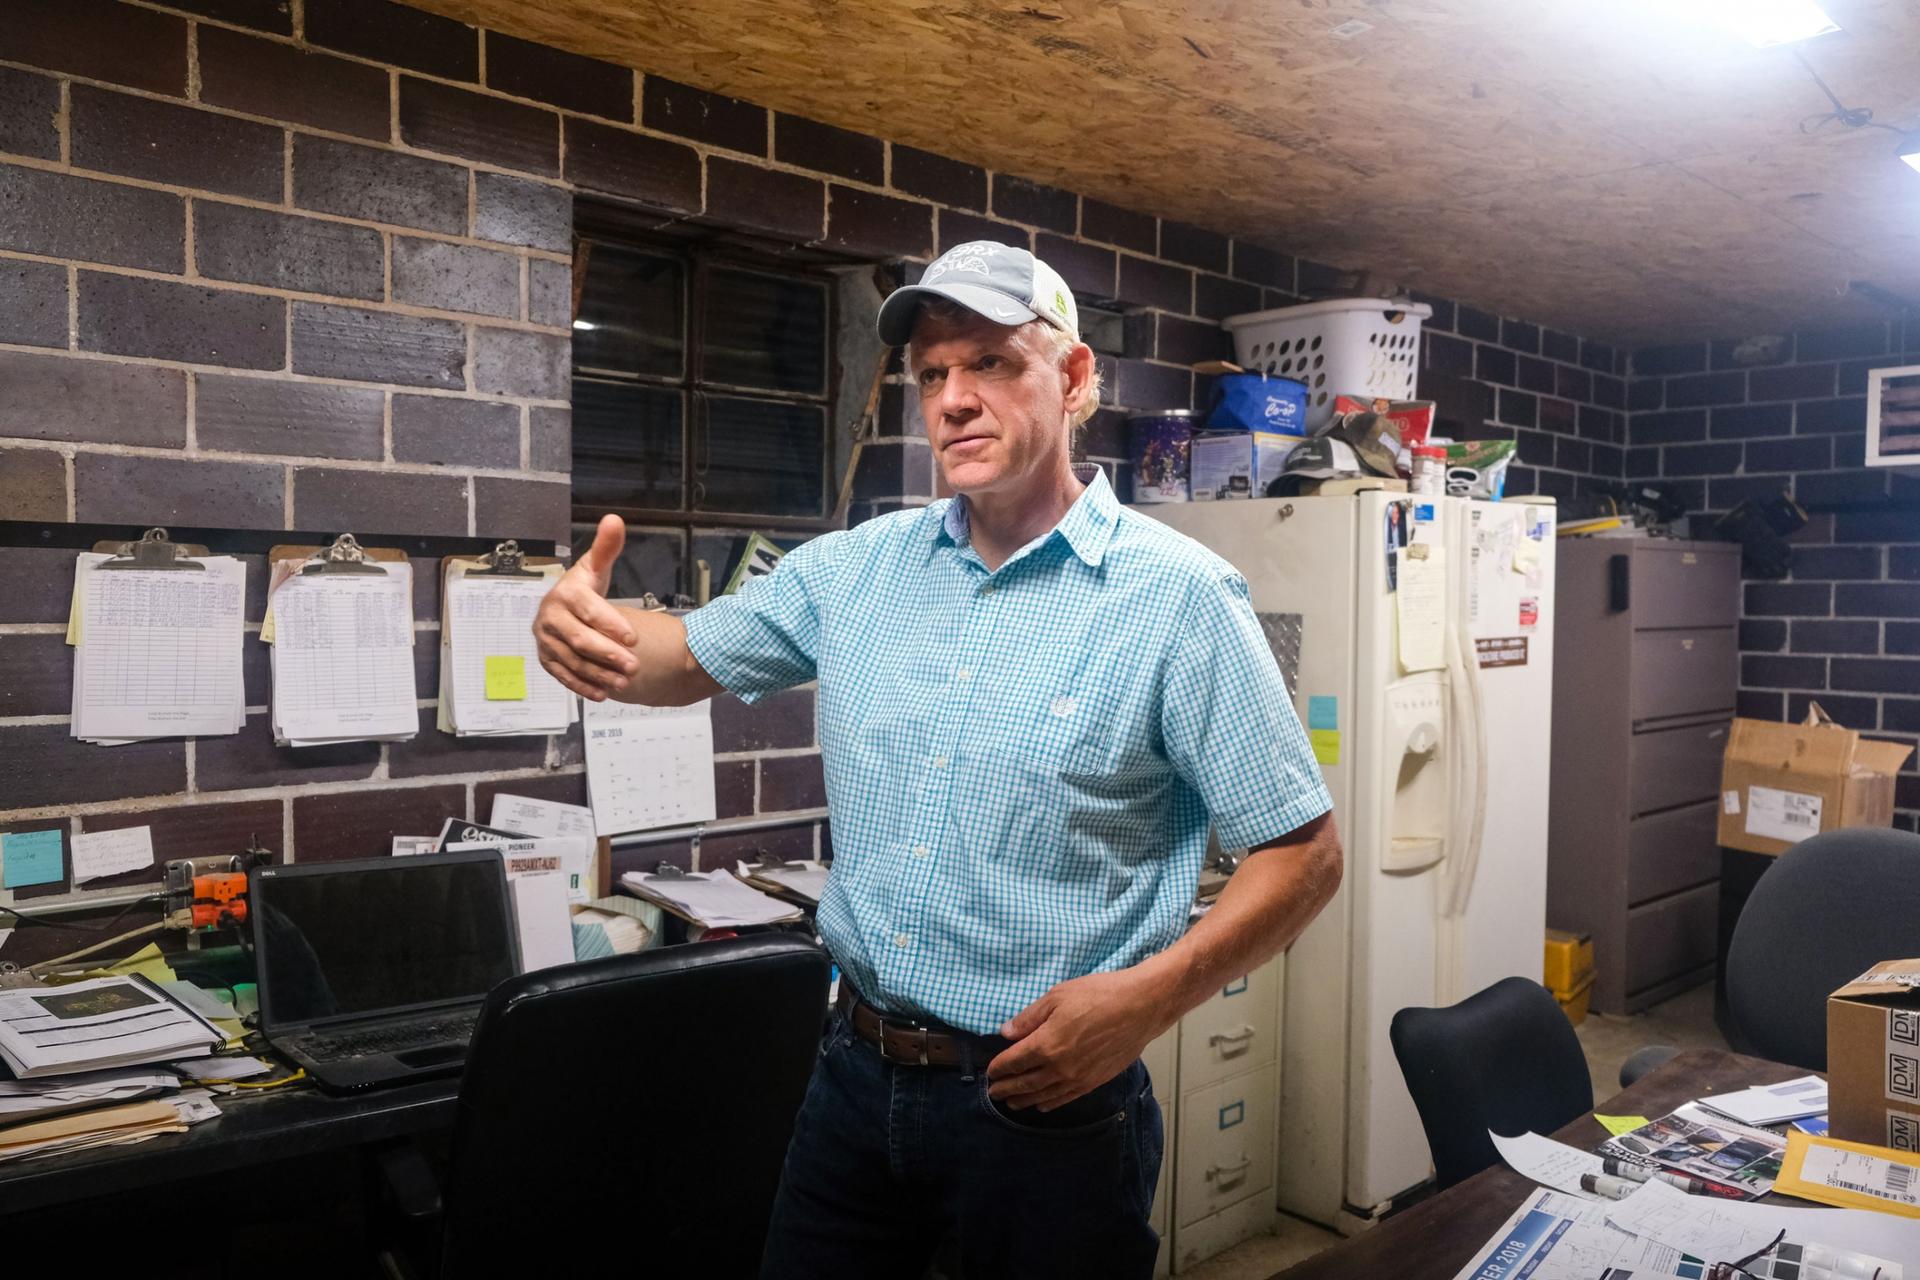 Corn and soybean farmer Bruce Peterson is shown standing in an office wearing a blue shirt and a gray hat.